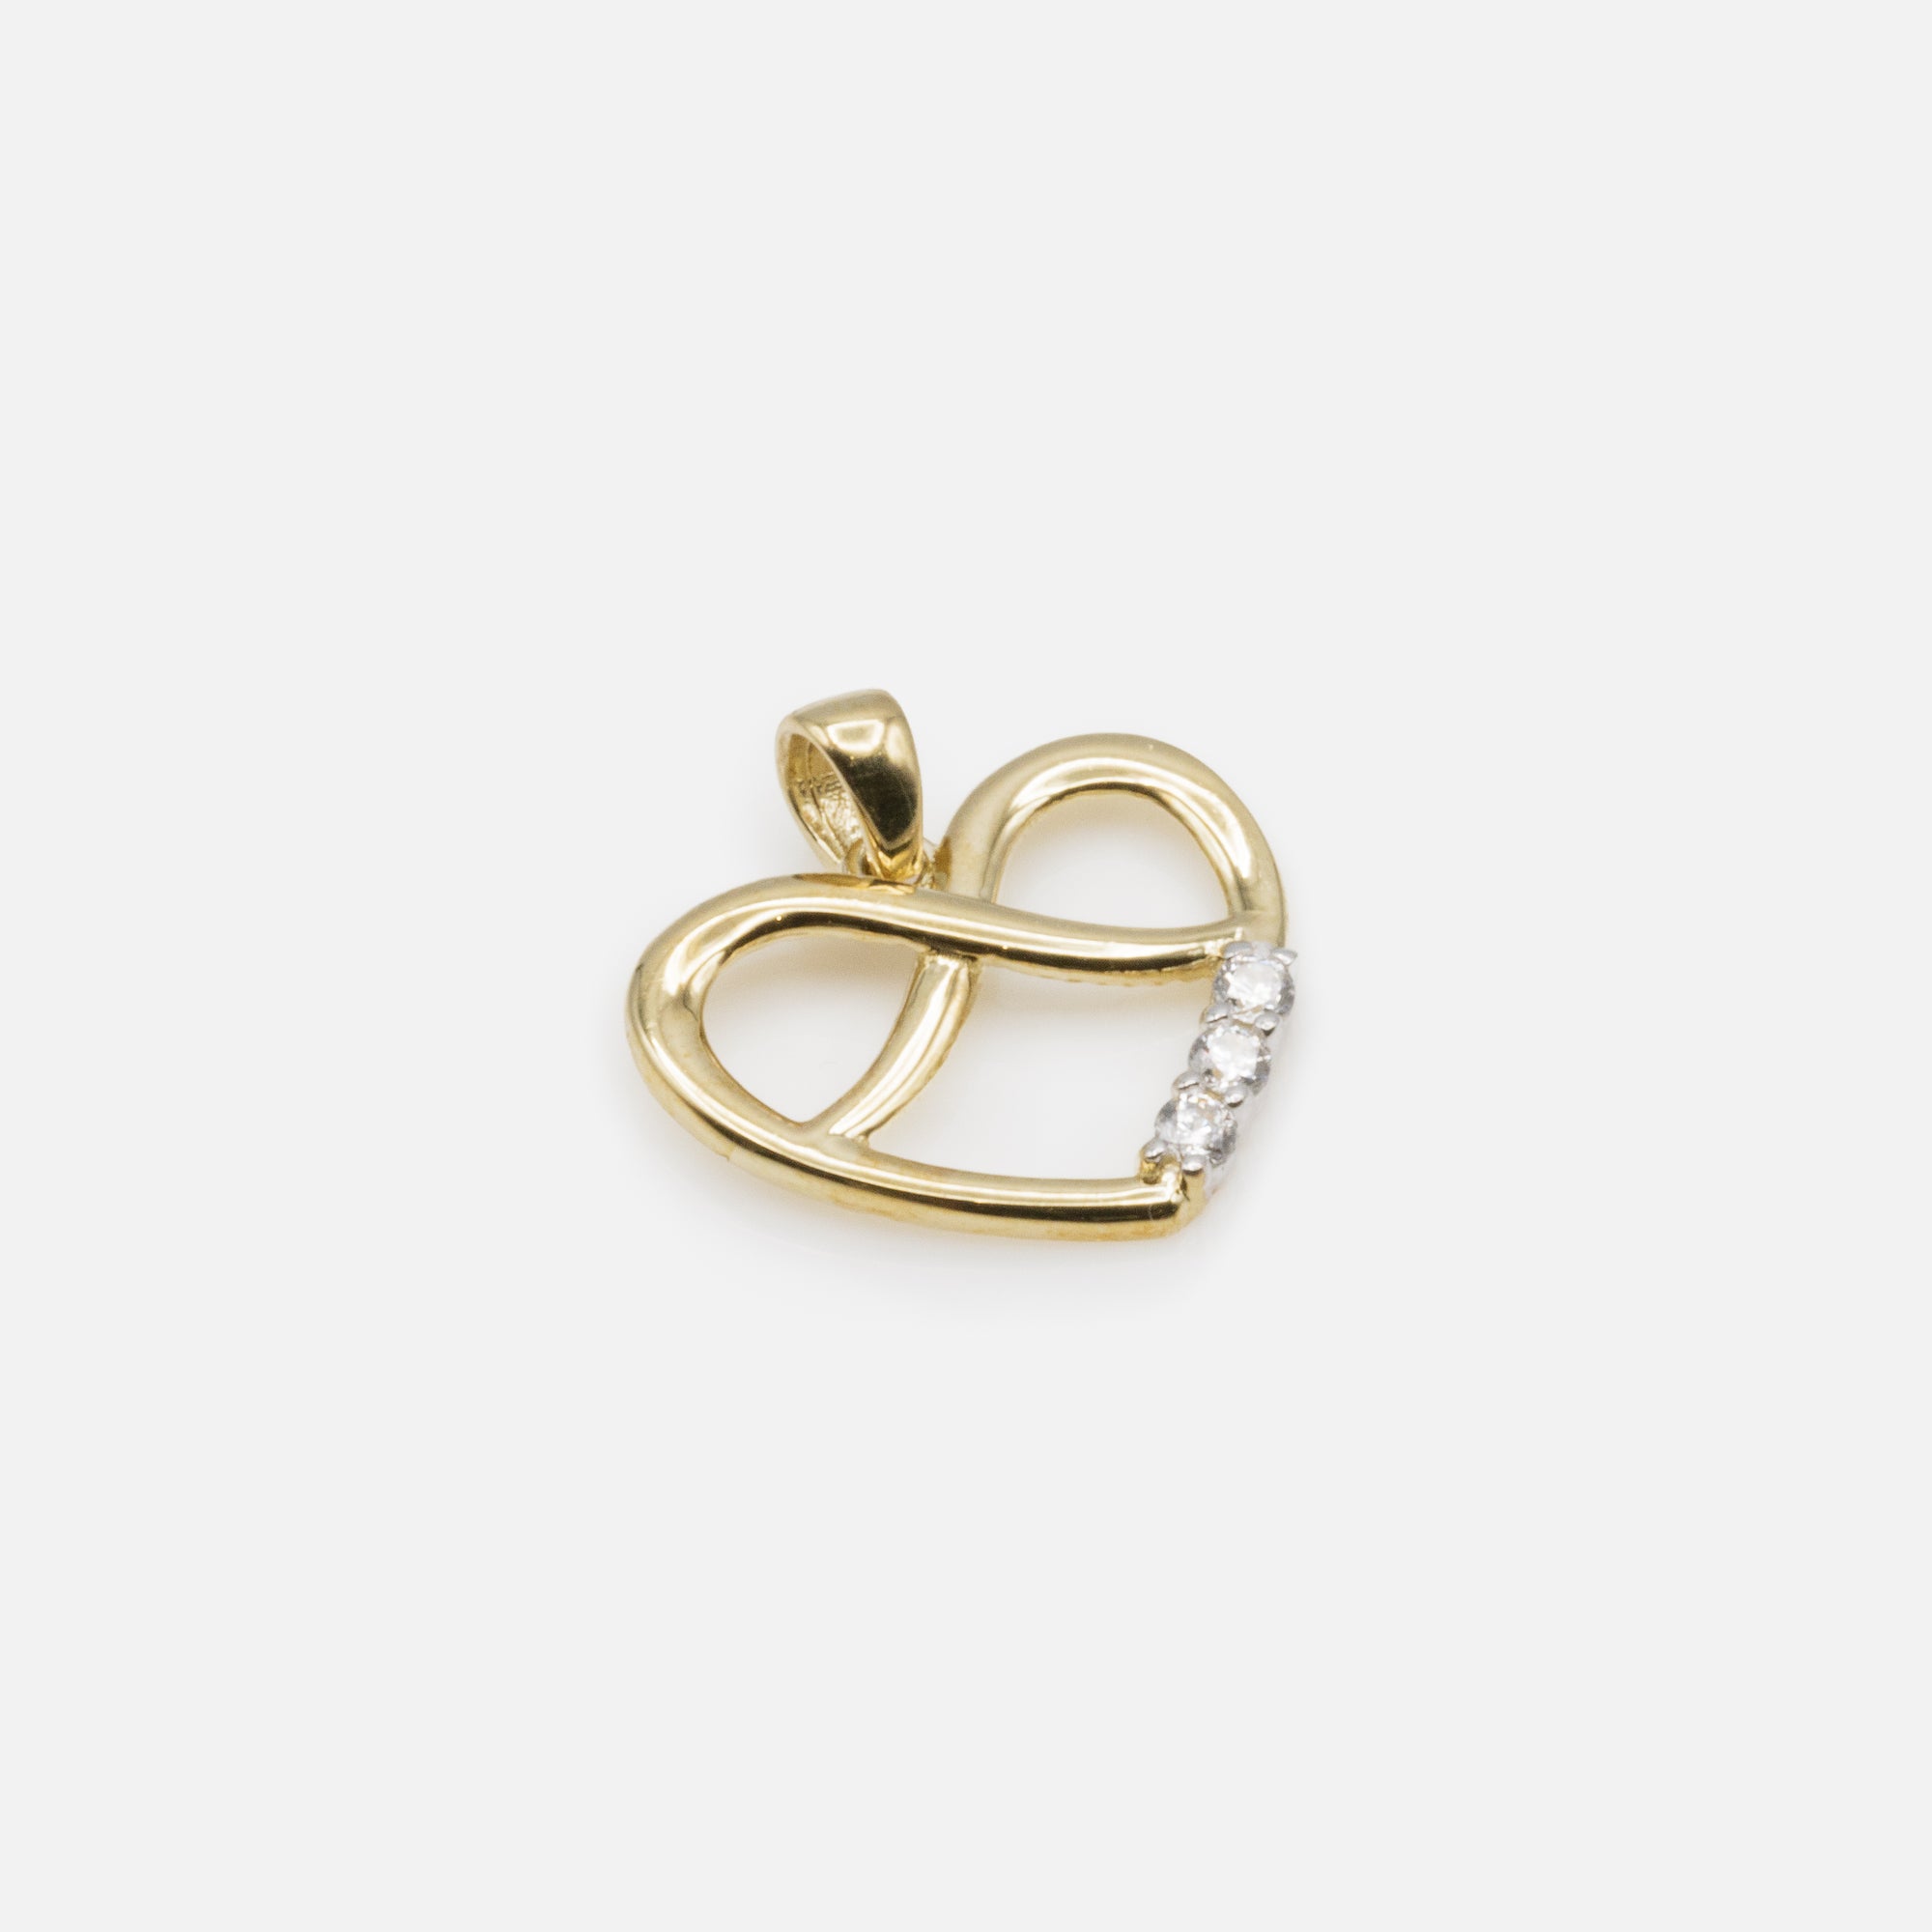 Gold Heart Charm and Trio of Cubic Zirconia in 10k Gold